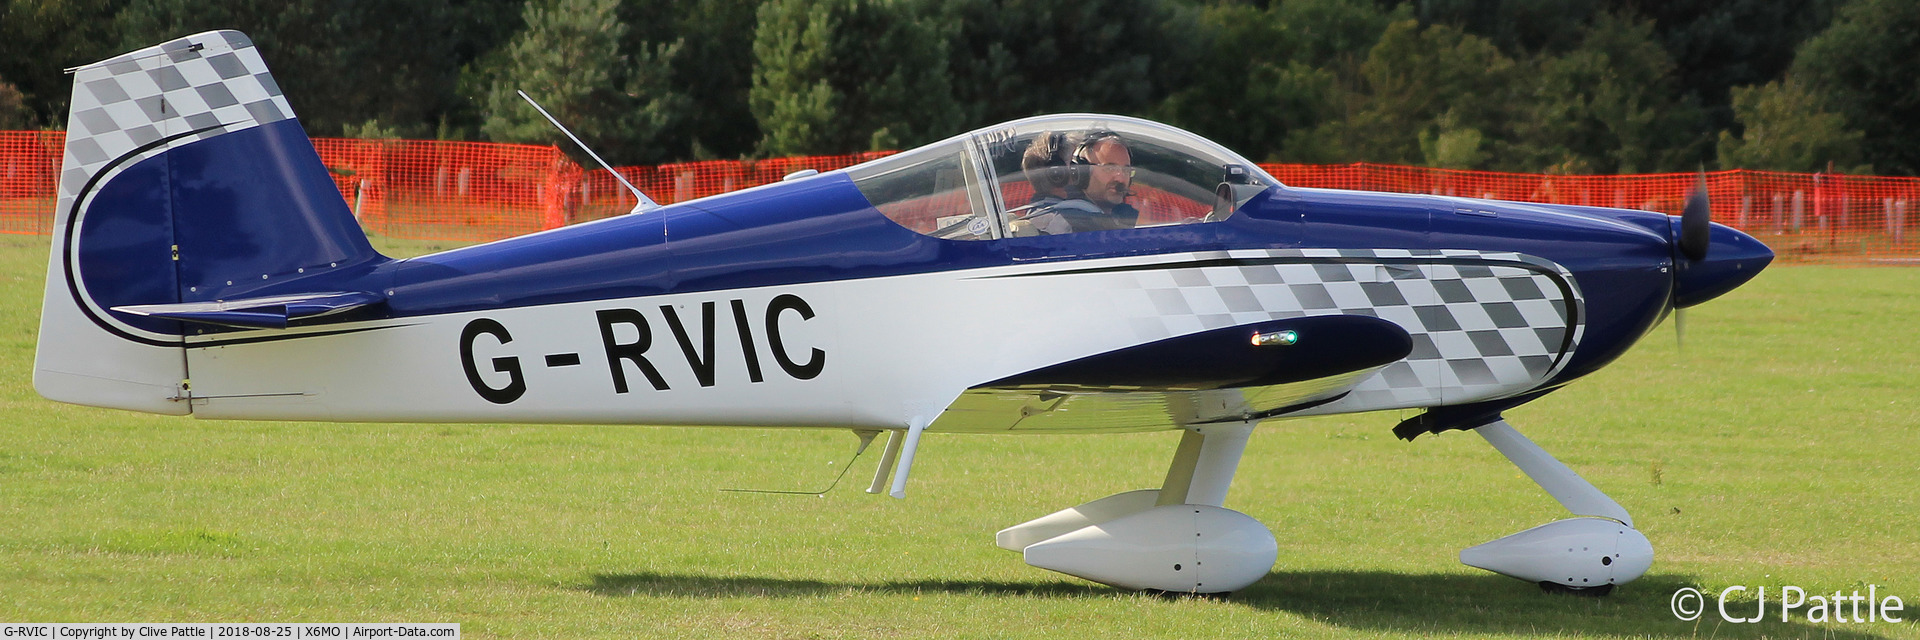 G-RVIC, 2004 Vans RV-6A C/N PFA 181-13319, Present at the Montrose Air Station Heritage Centre light aircraft fly-in held on 25th August 2018.